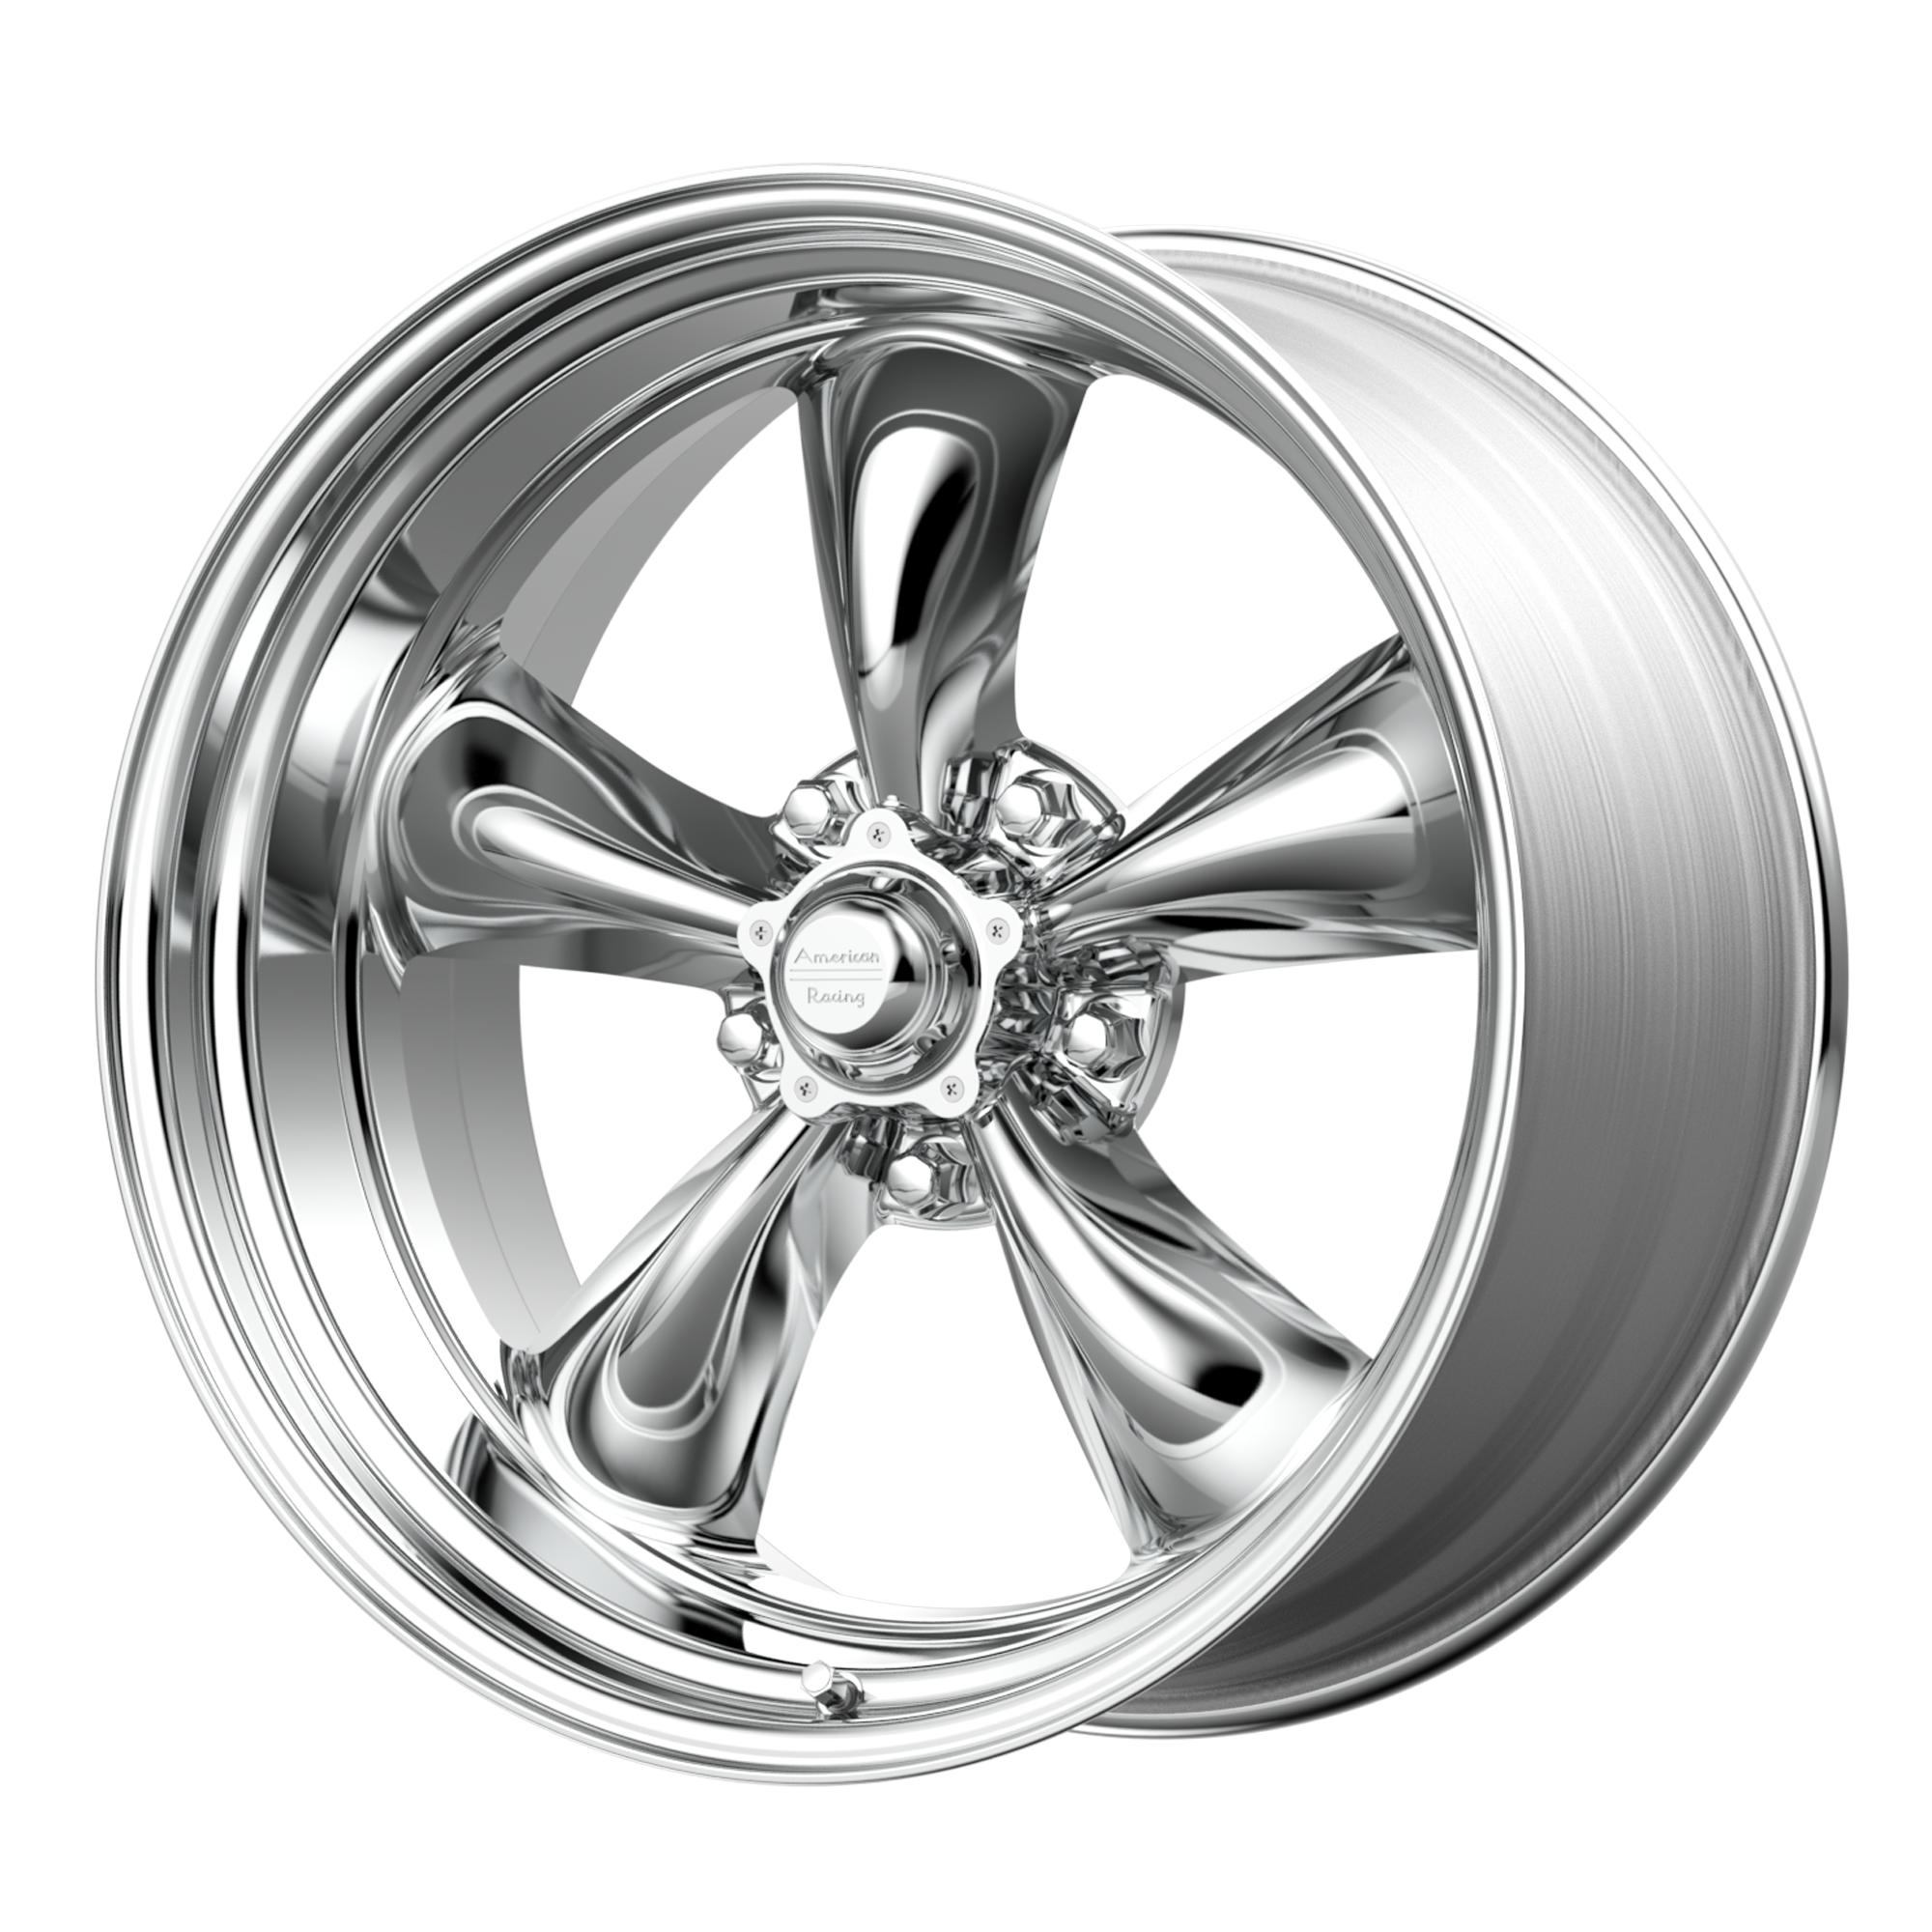 TORQ THRUST II 1 PC 17x9.5 5x120.65 POLISHED (8 mm) - Tires and Engine Performance